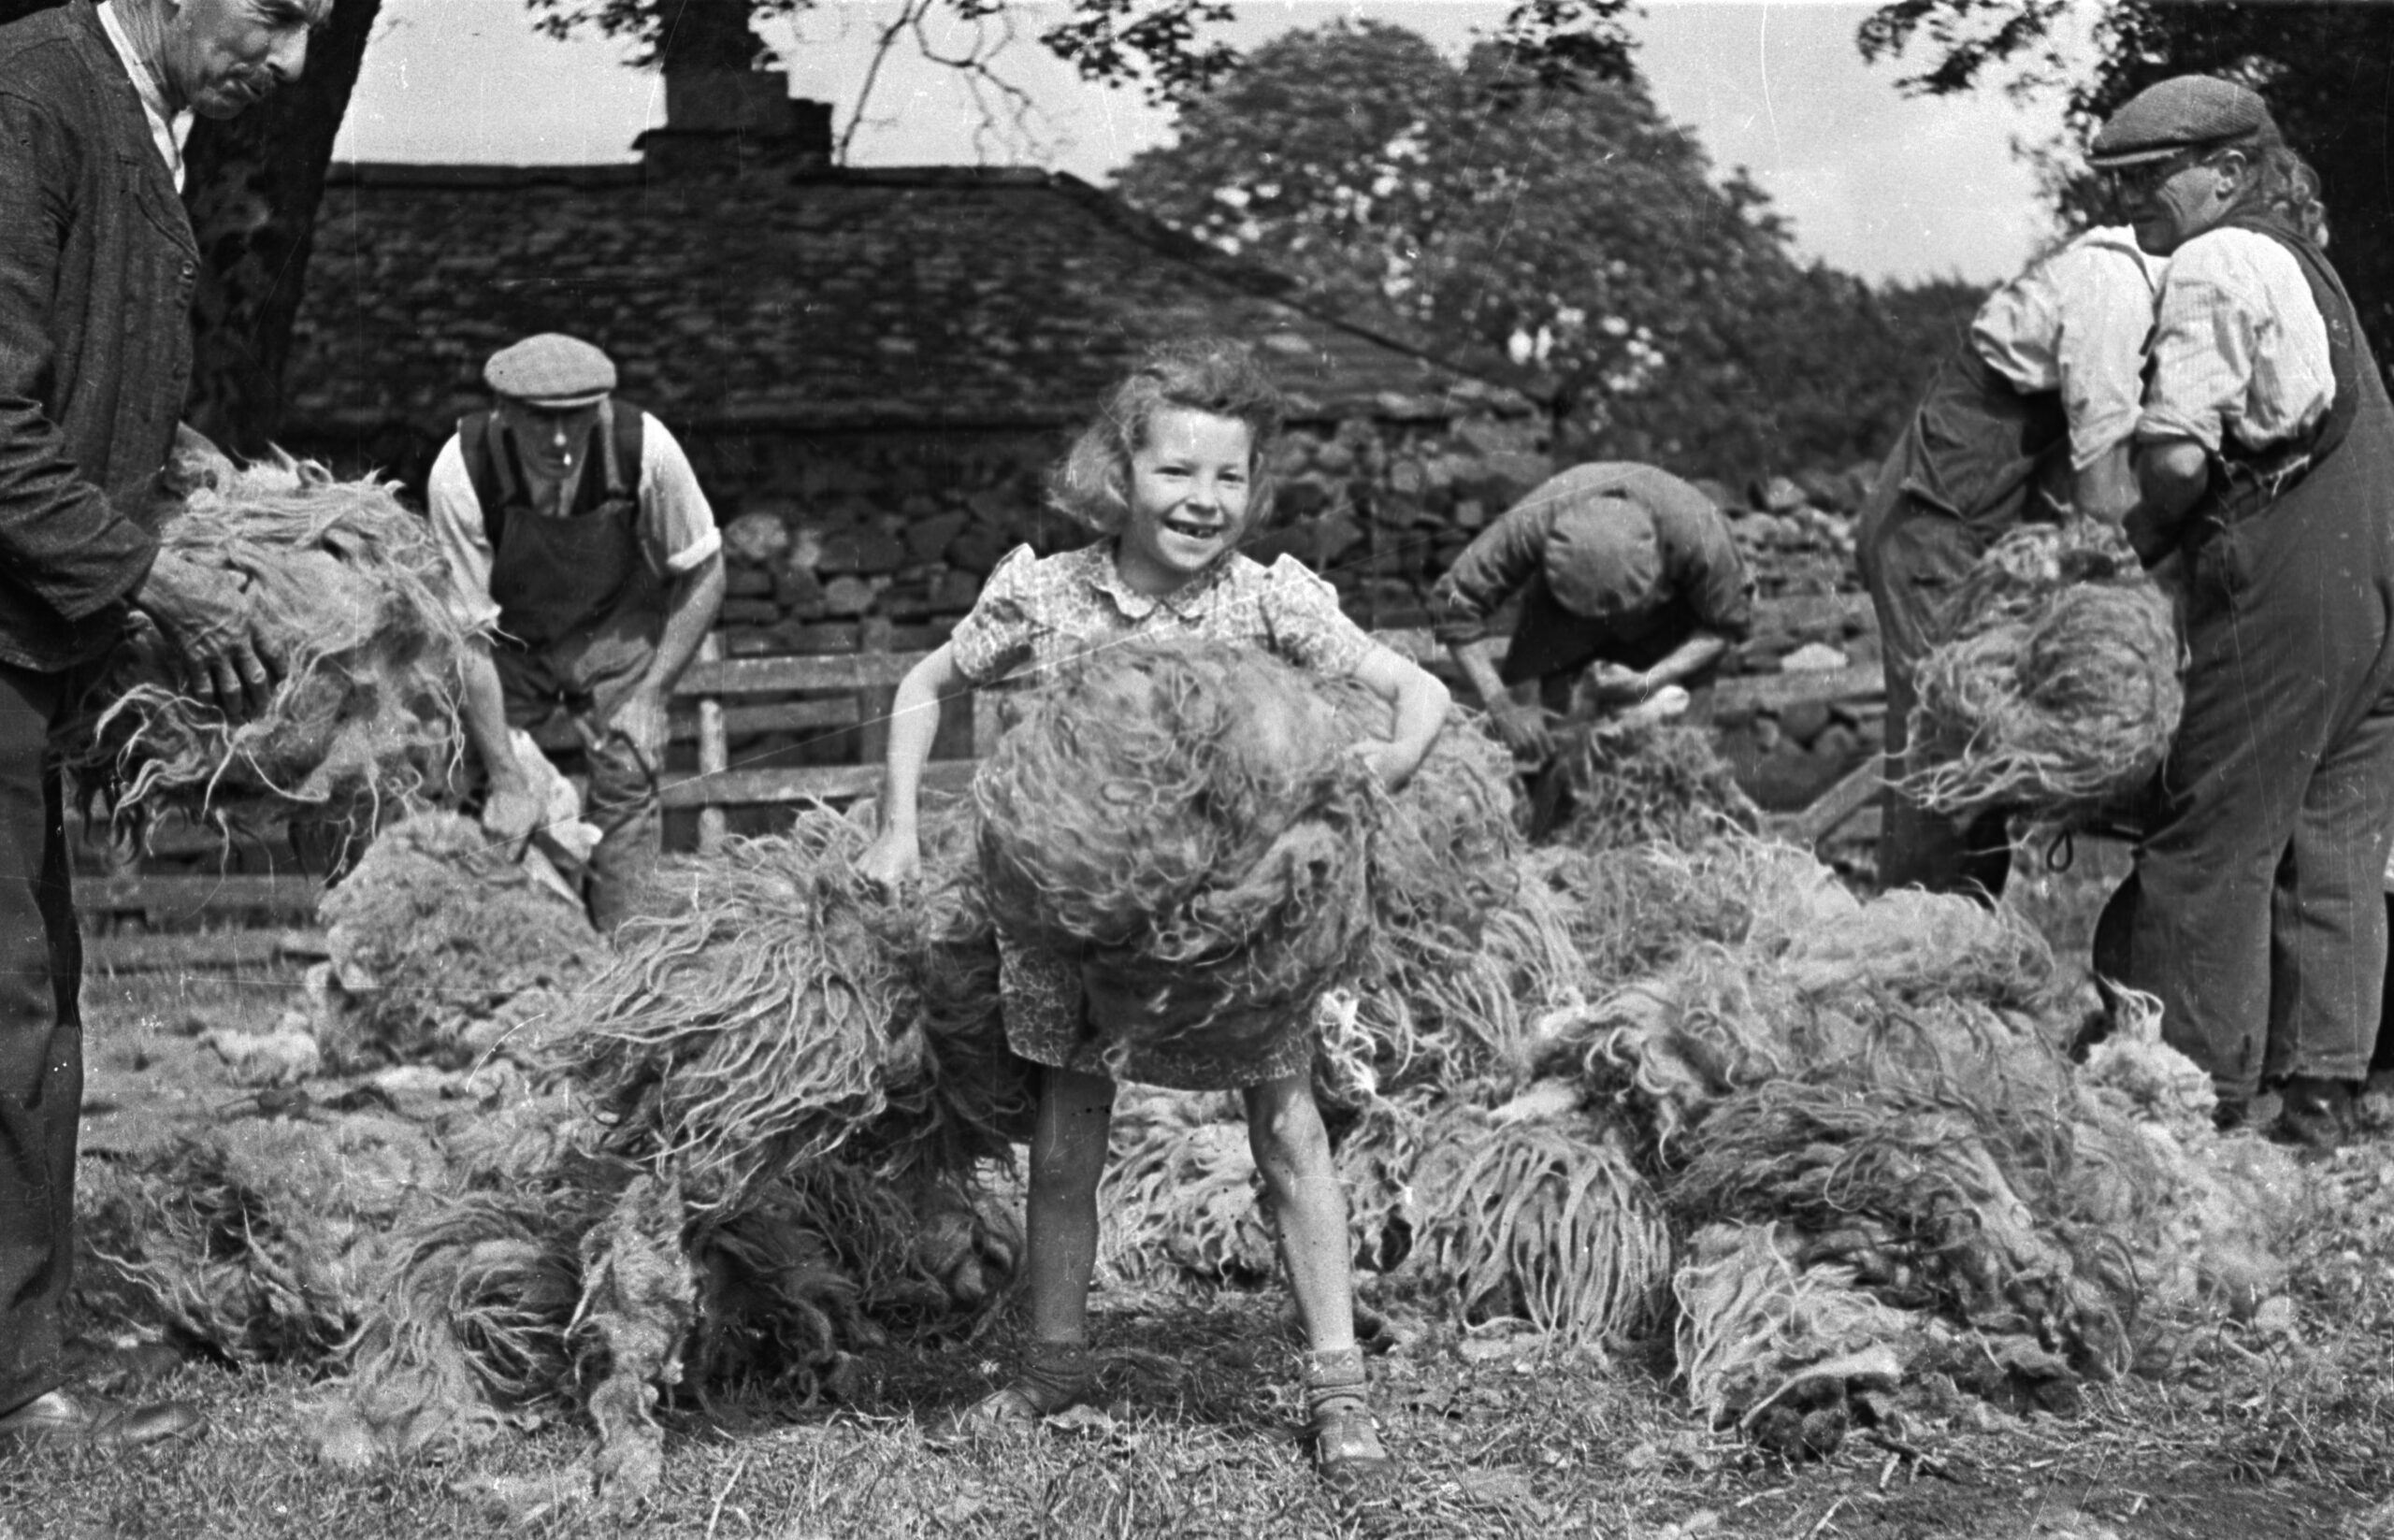 Young girl helps bring fleeces to the barn, August 1943 (Kurt Hutton/Picture Post/Getty Images)